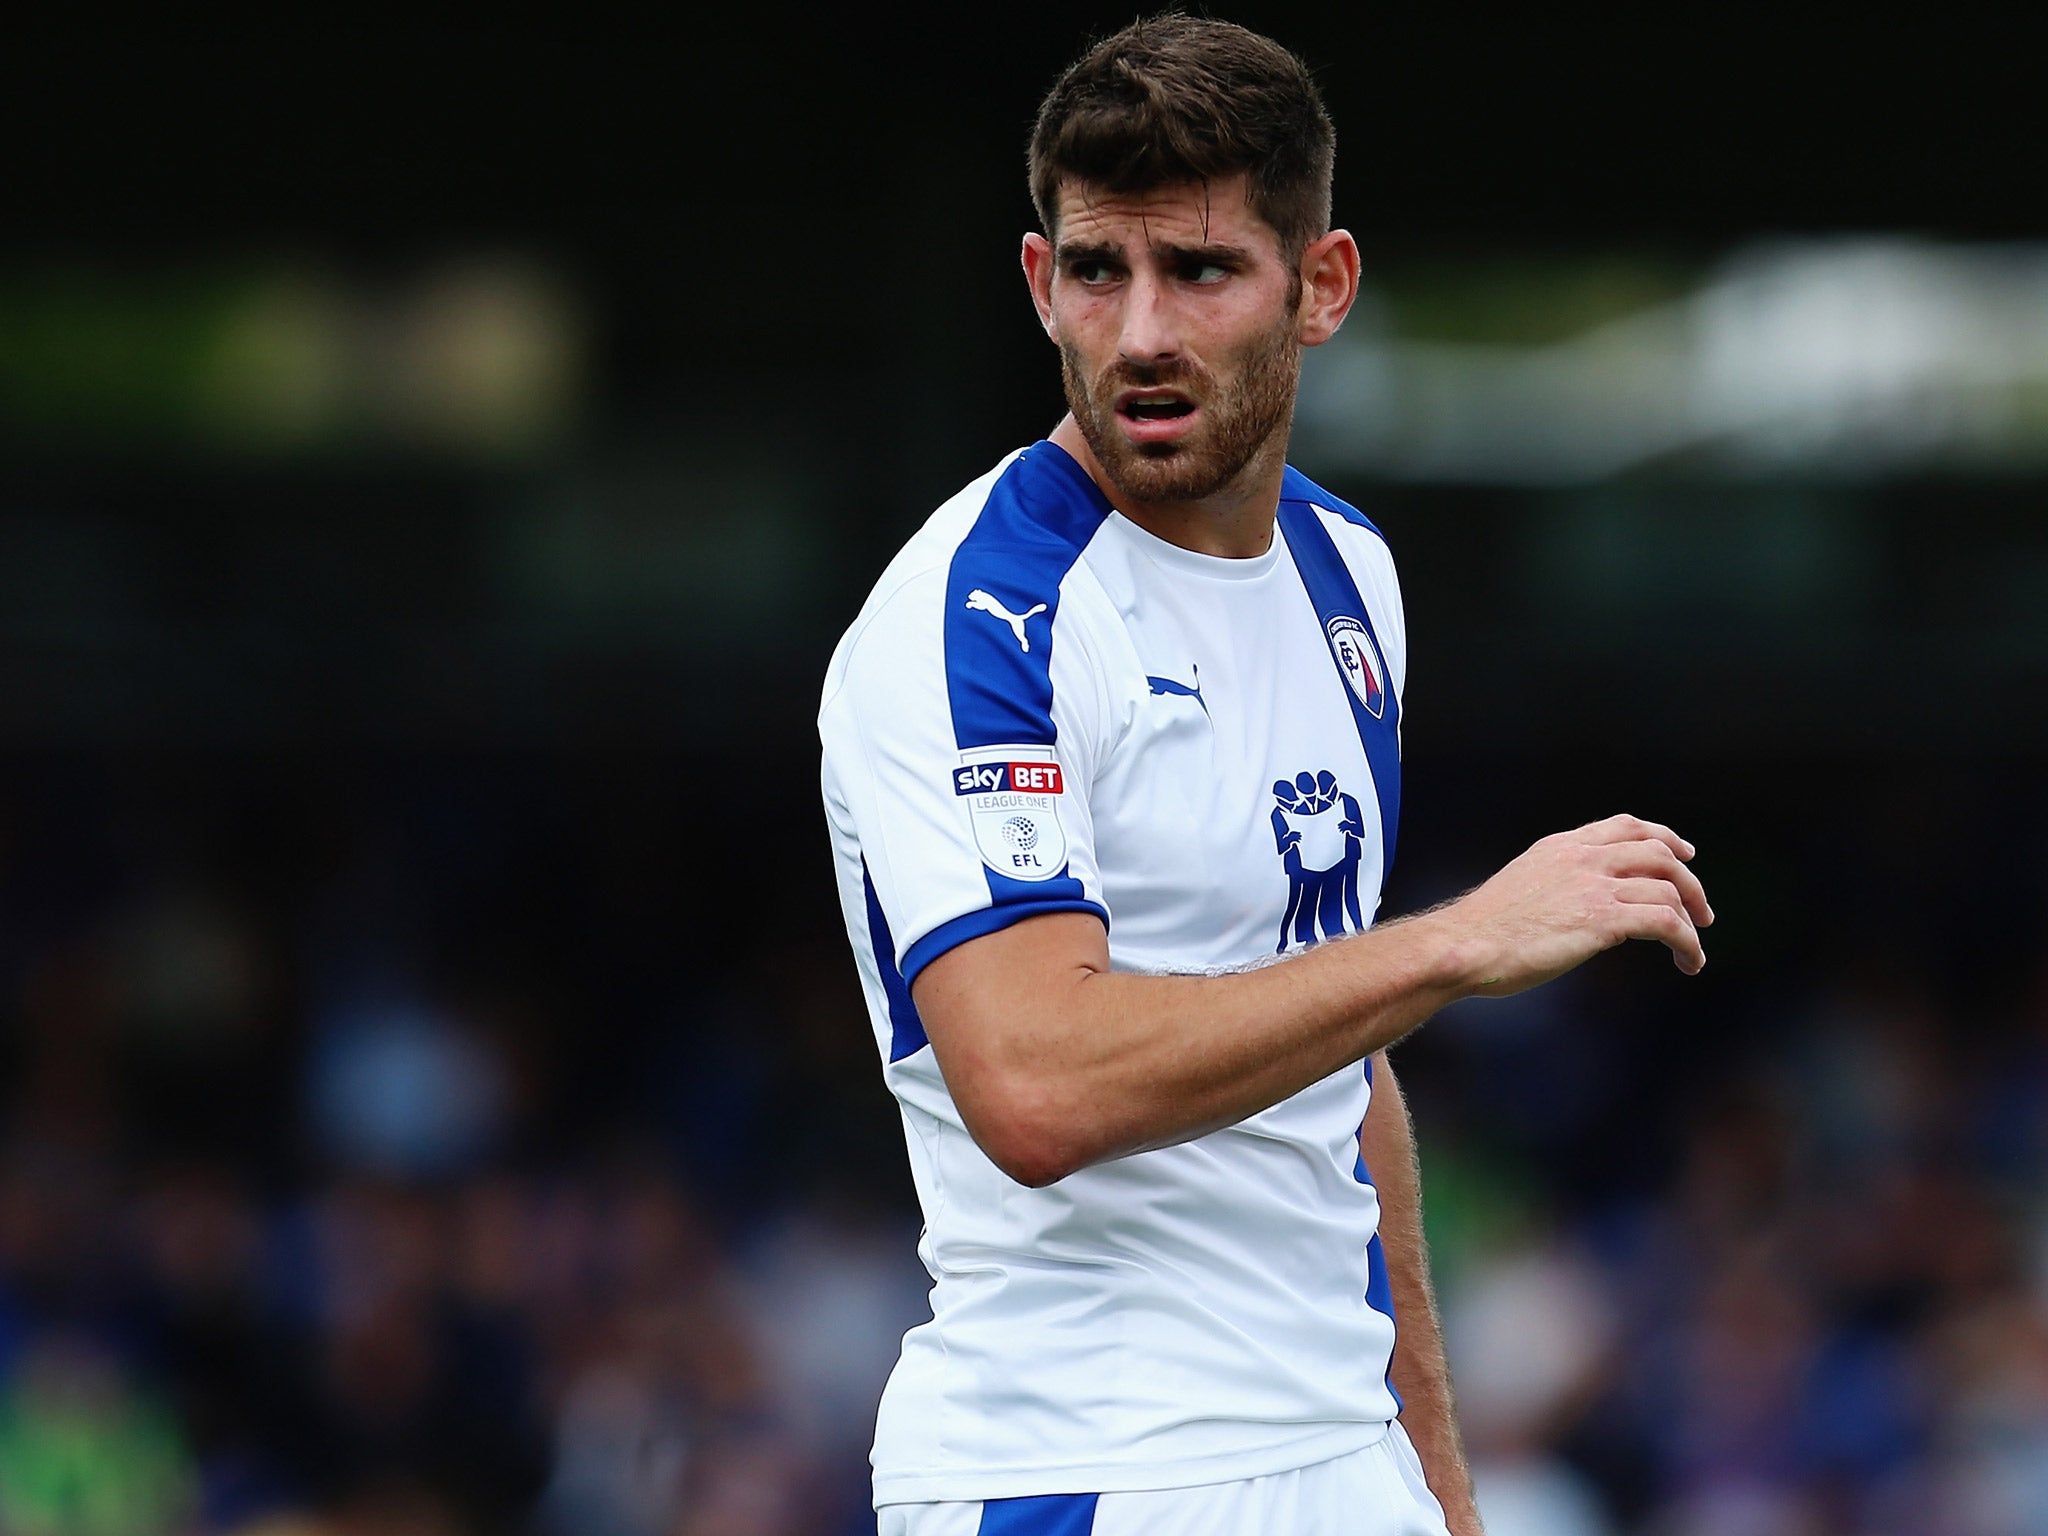 Ched Evans currently plays for Chesterfield, who were 'naturally delighted' that the striker was cleared of rape